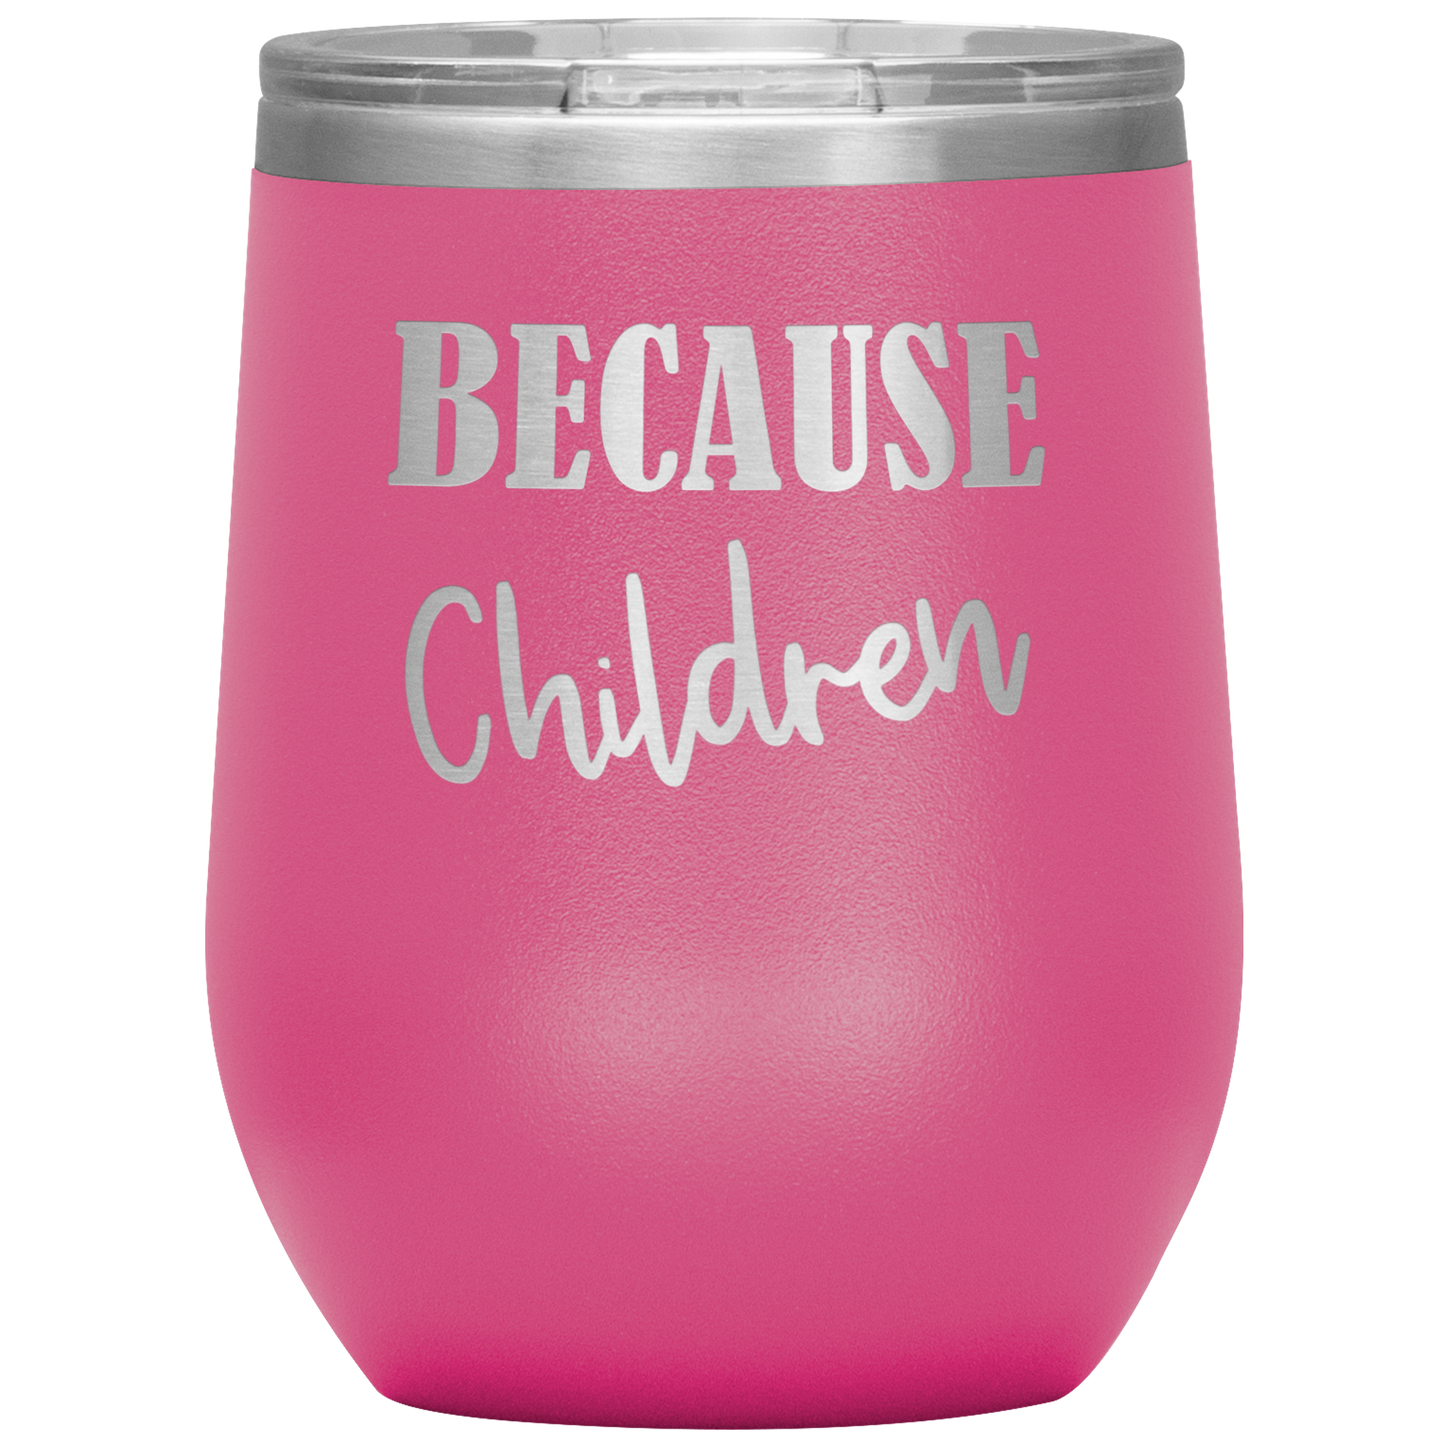 Custom "Because Children" 12 oz. Insulated Stainless Steel Wine Tumbler with Lid